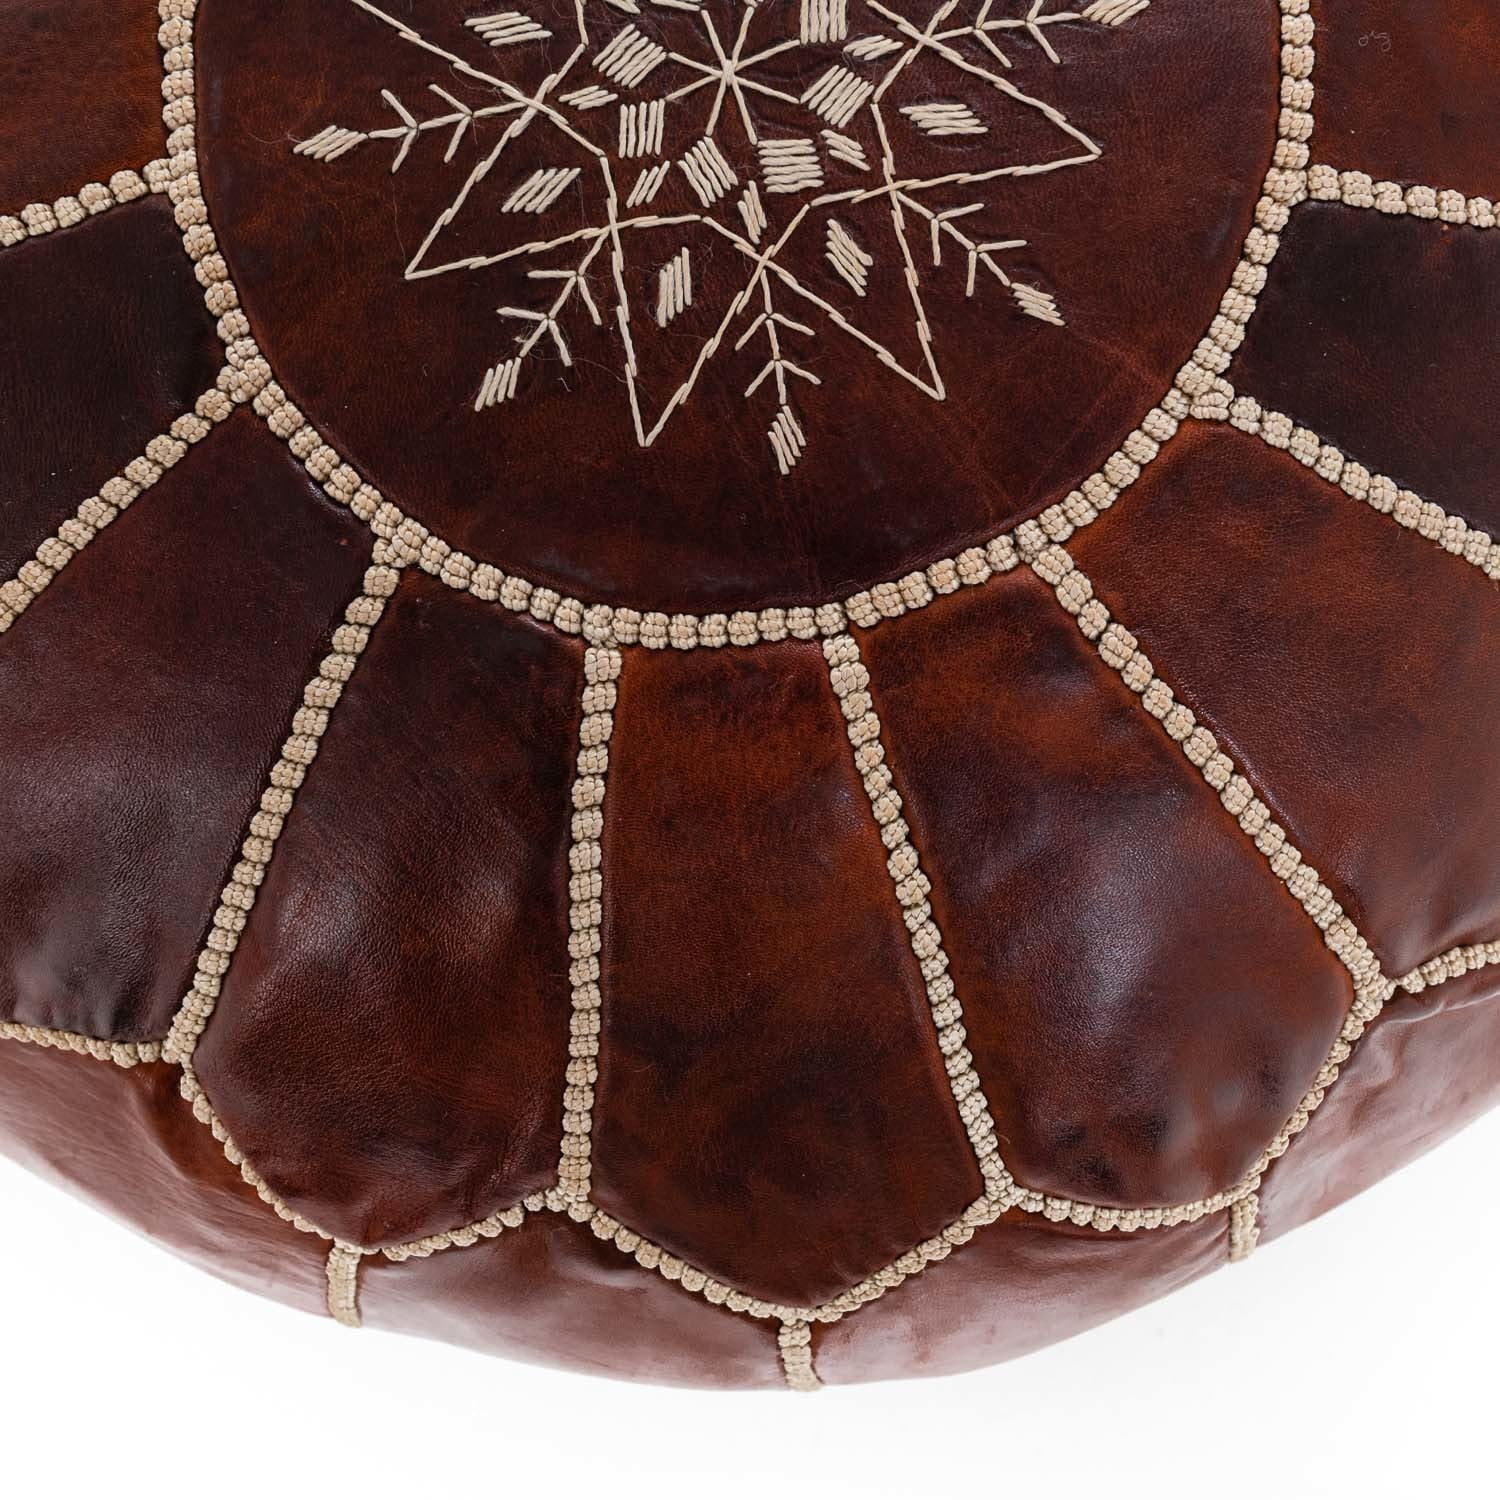 Authentic Moroccan Leather Pouf - Chocolate - Benisouk